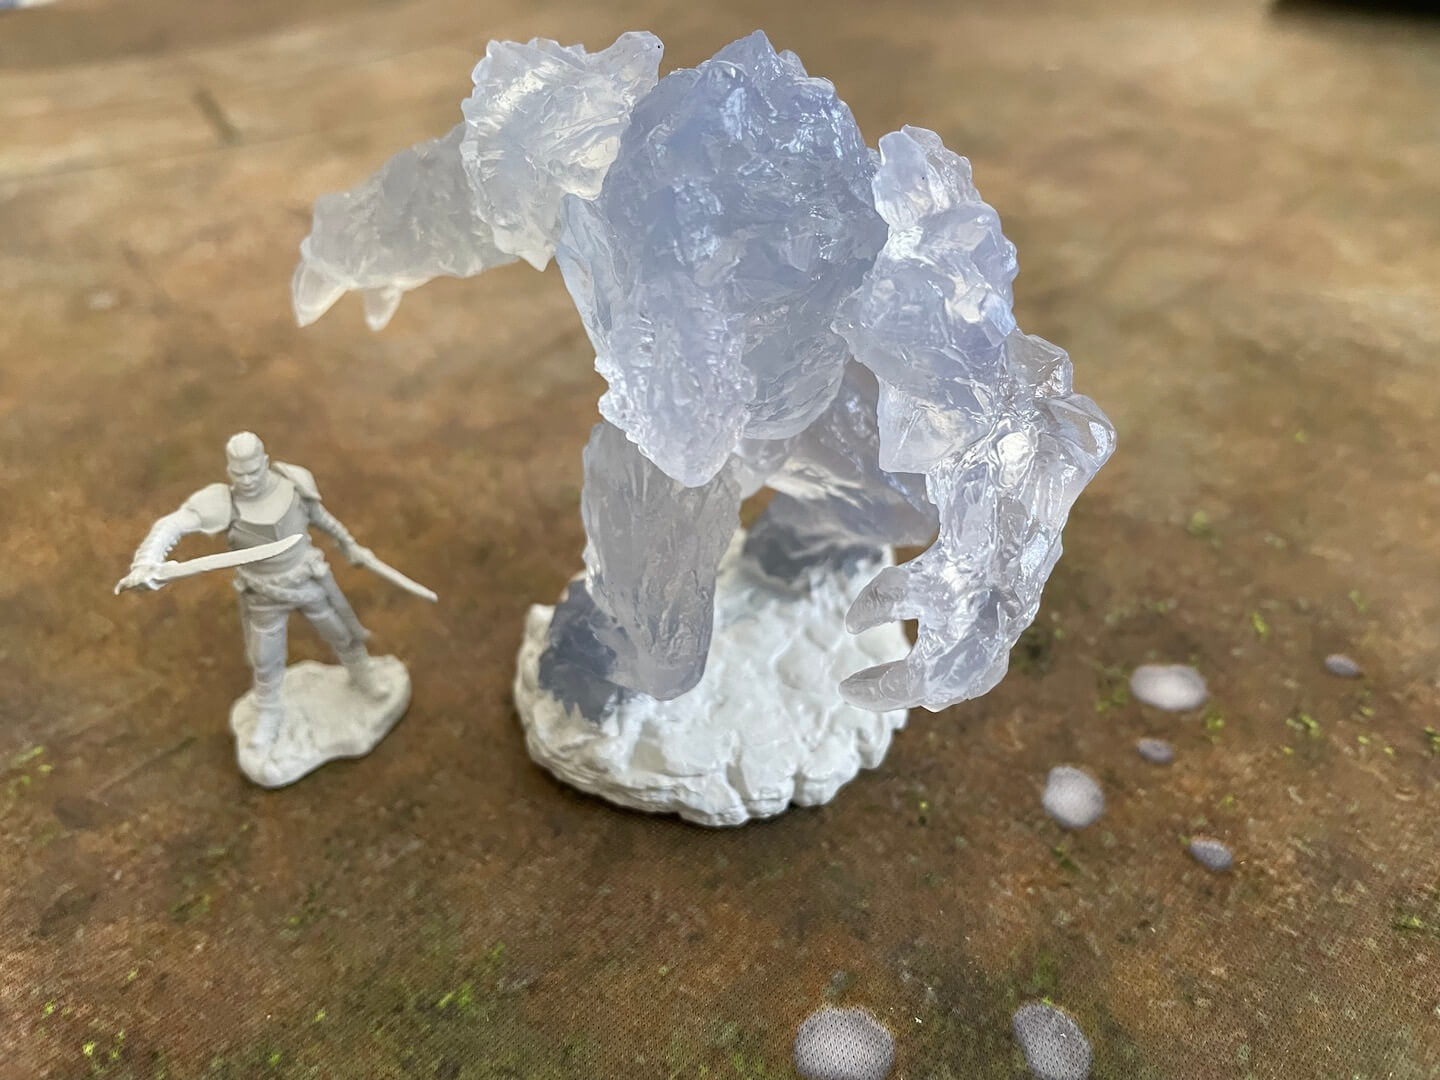 The Cinderslag Elemental looms with imposing force in Wave 2 of Wizkids' unpainted Critical Role miniatures